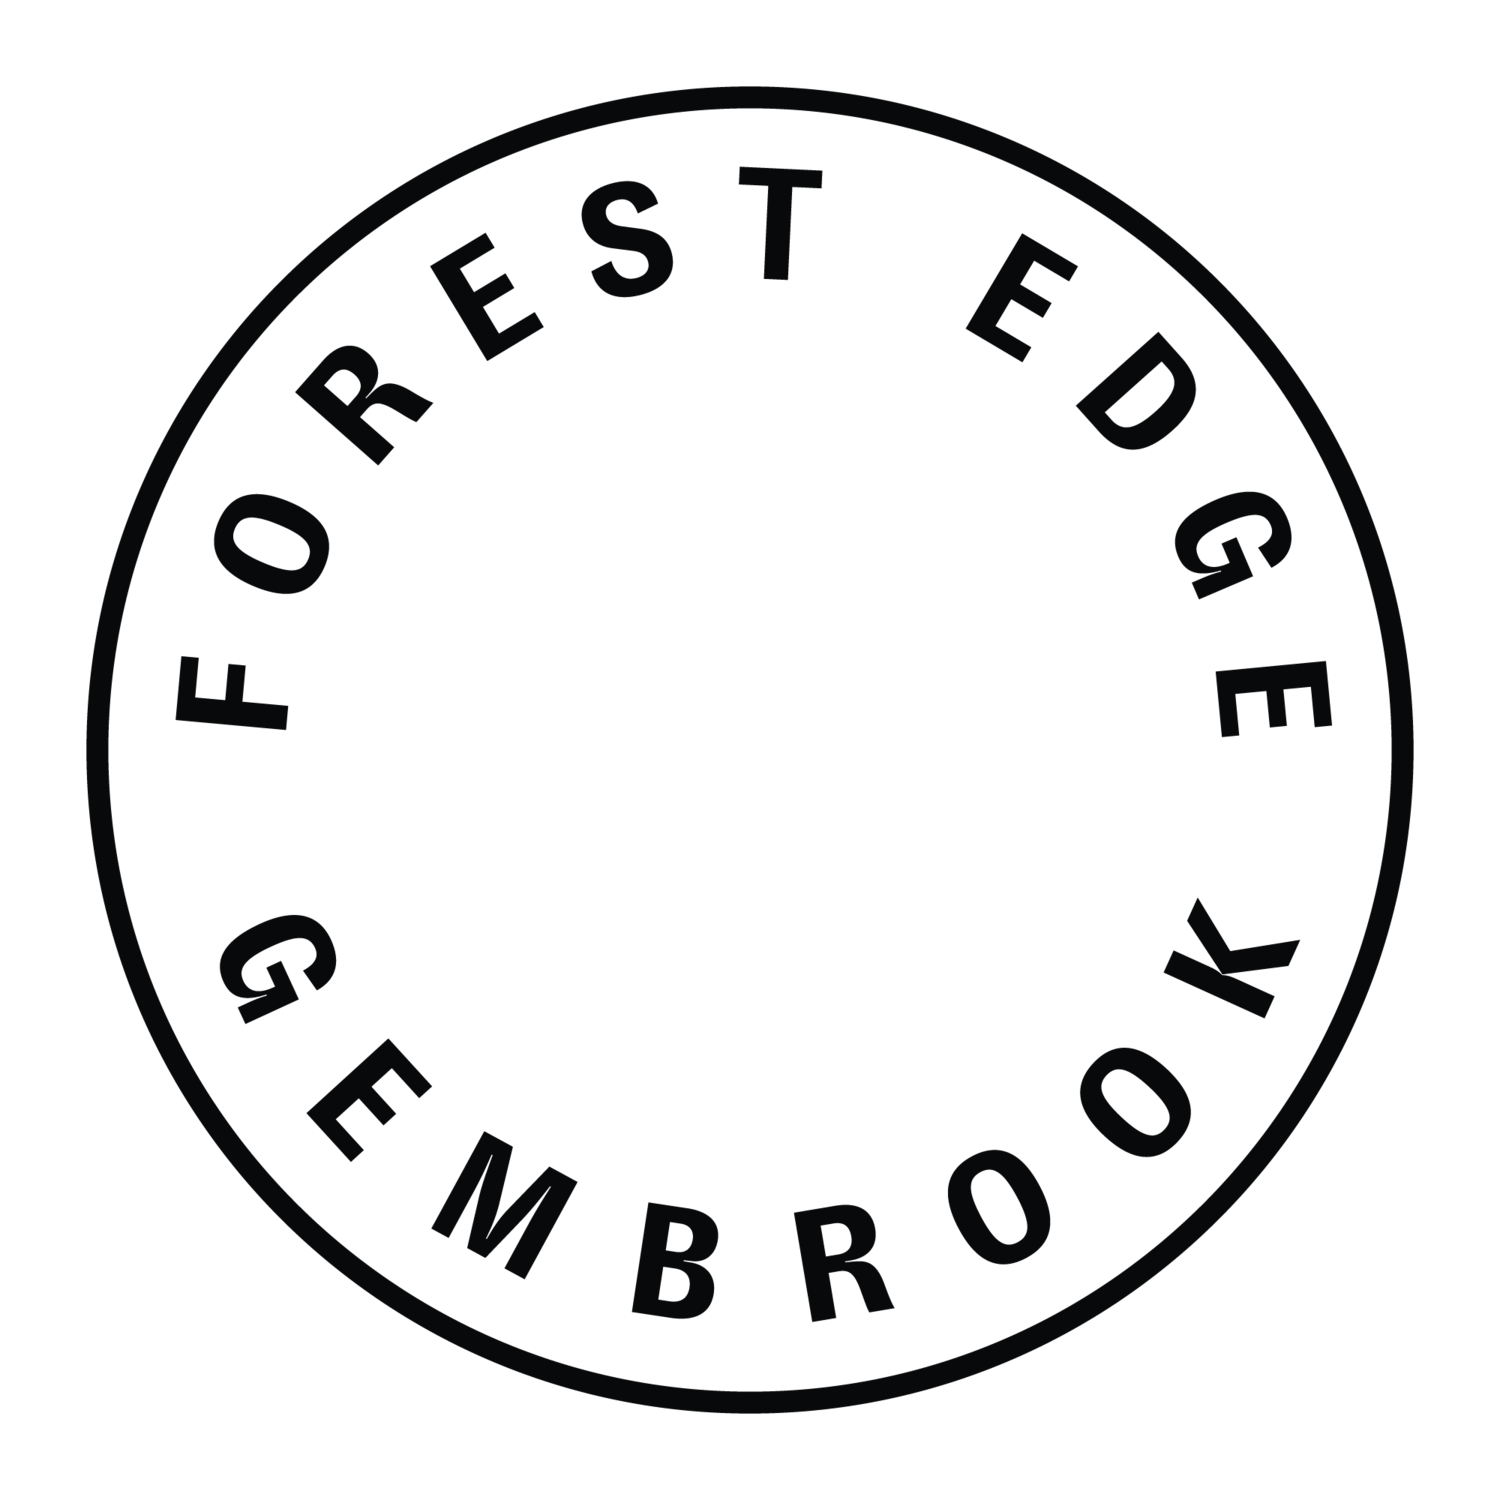 Forest Edge